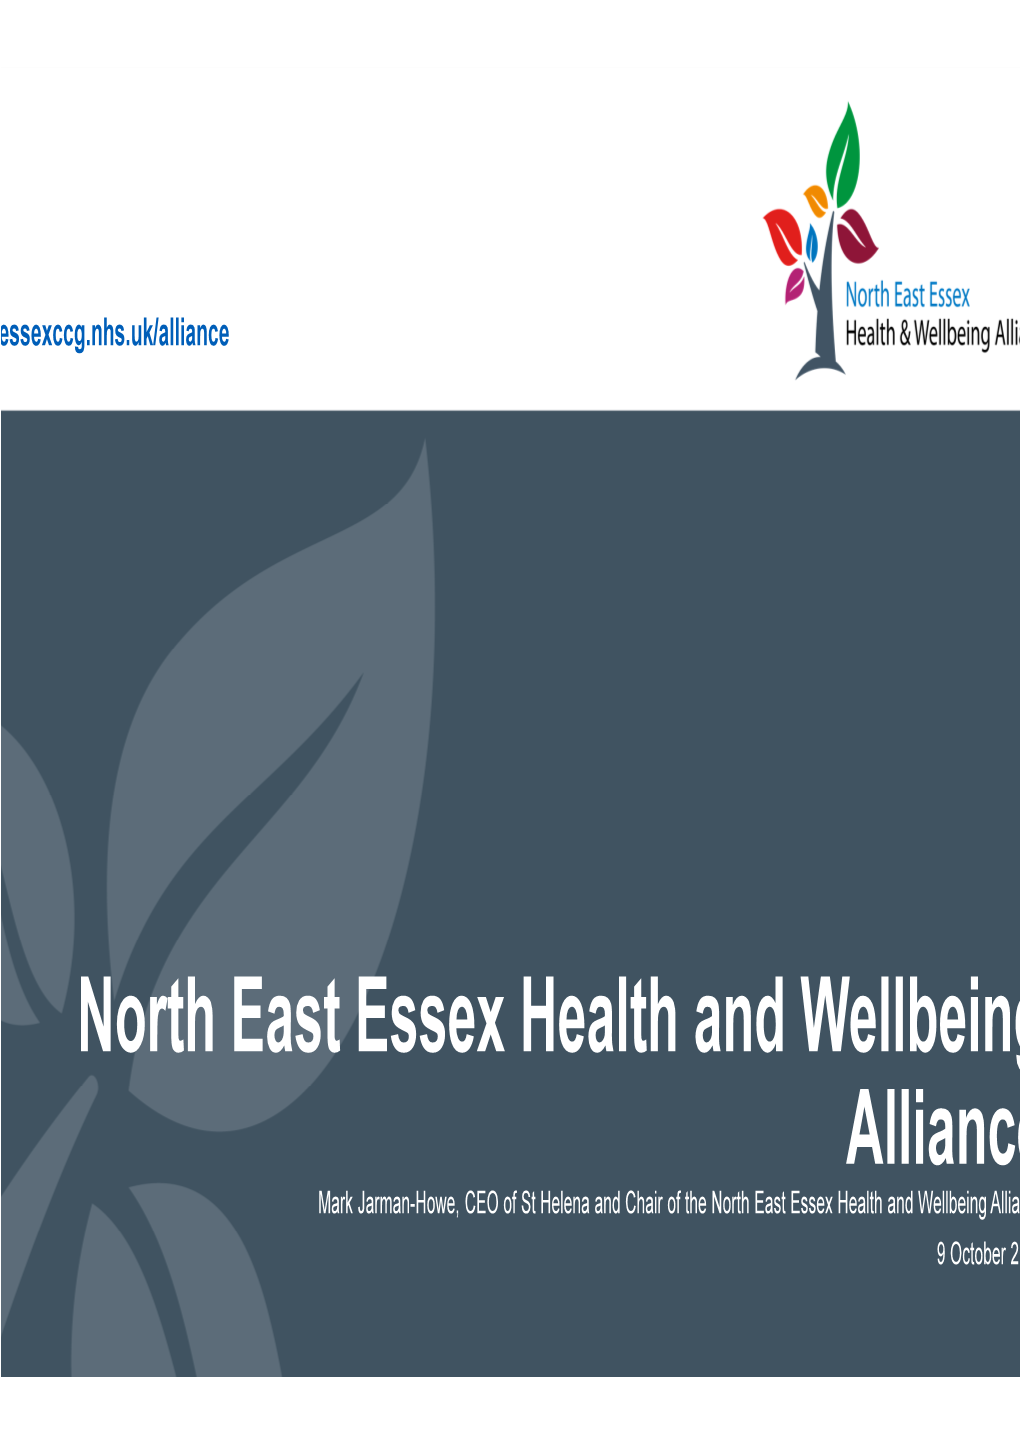 North East Essex Health and Wellbeing Alliance